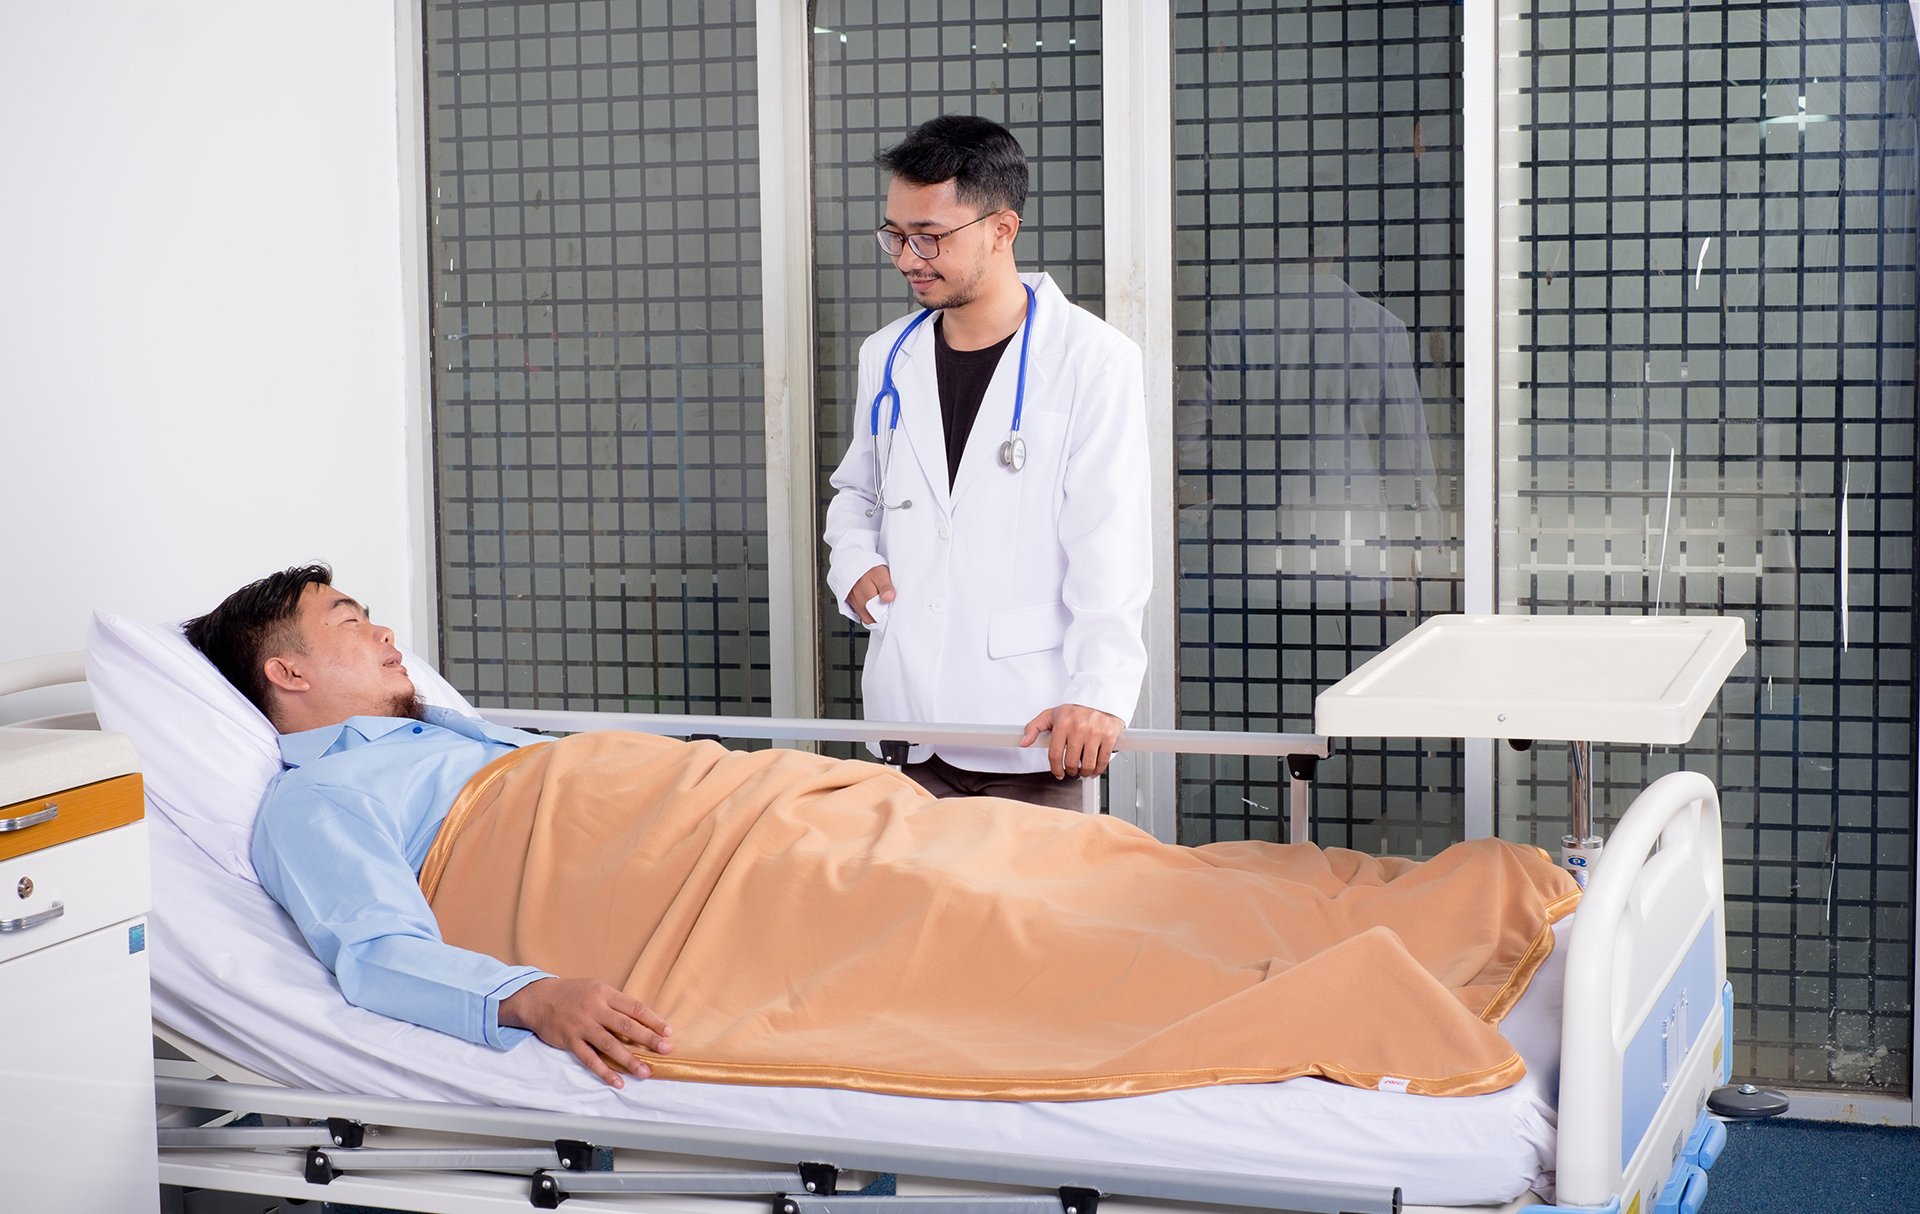 doctor standing near the injured patient. How Hearing Loss Puts You at Higher Risk for Other Injuries.